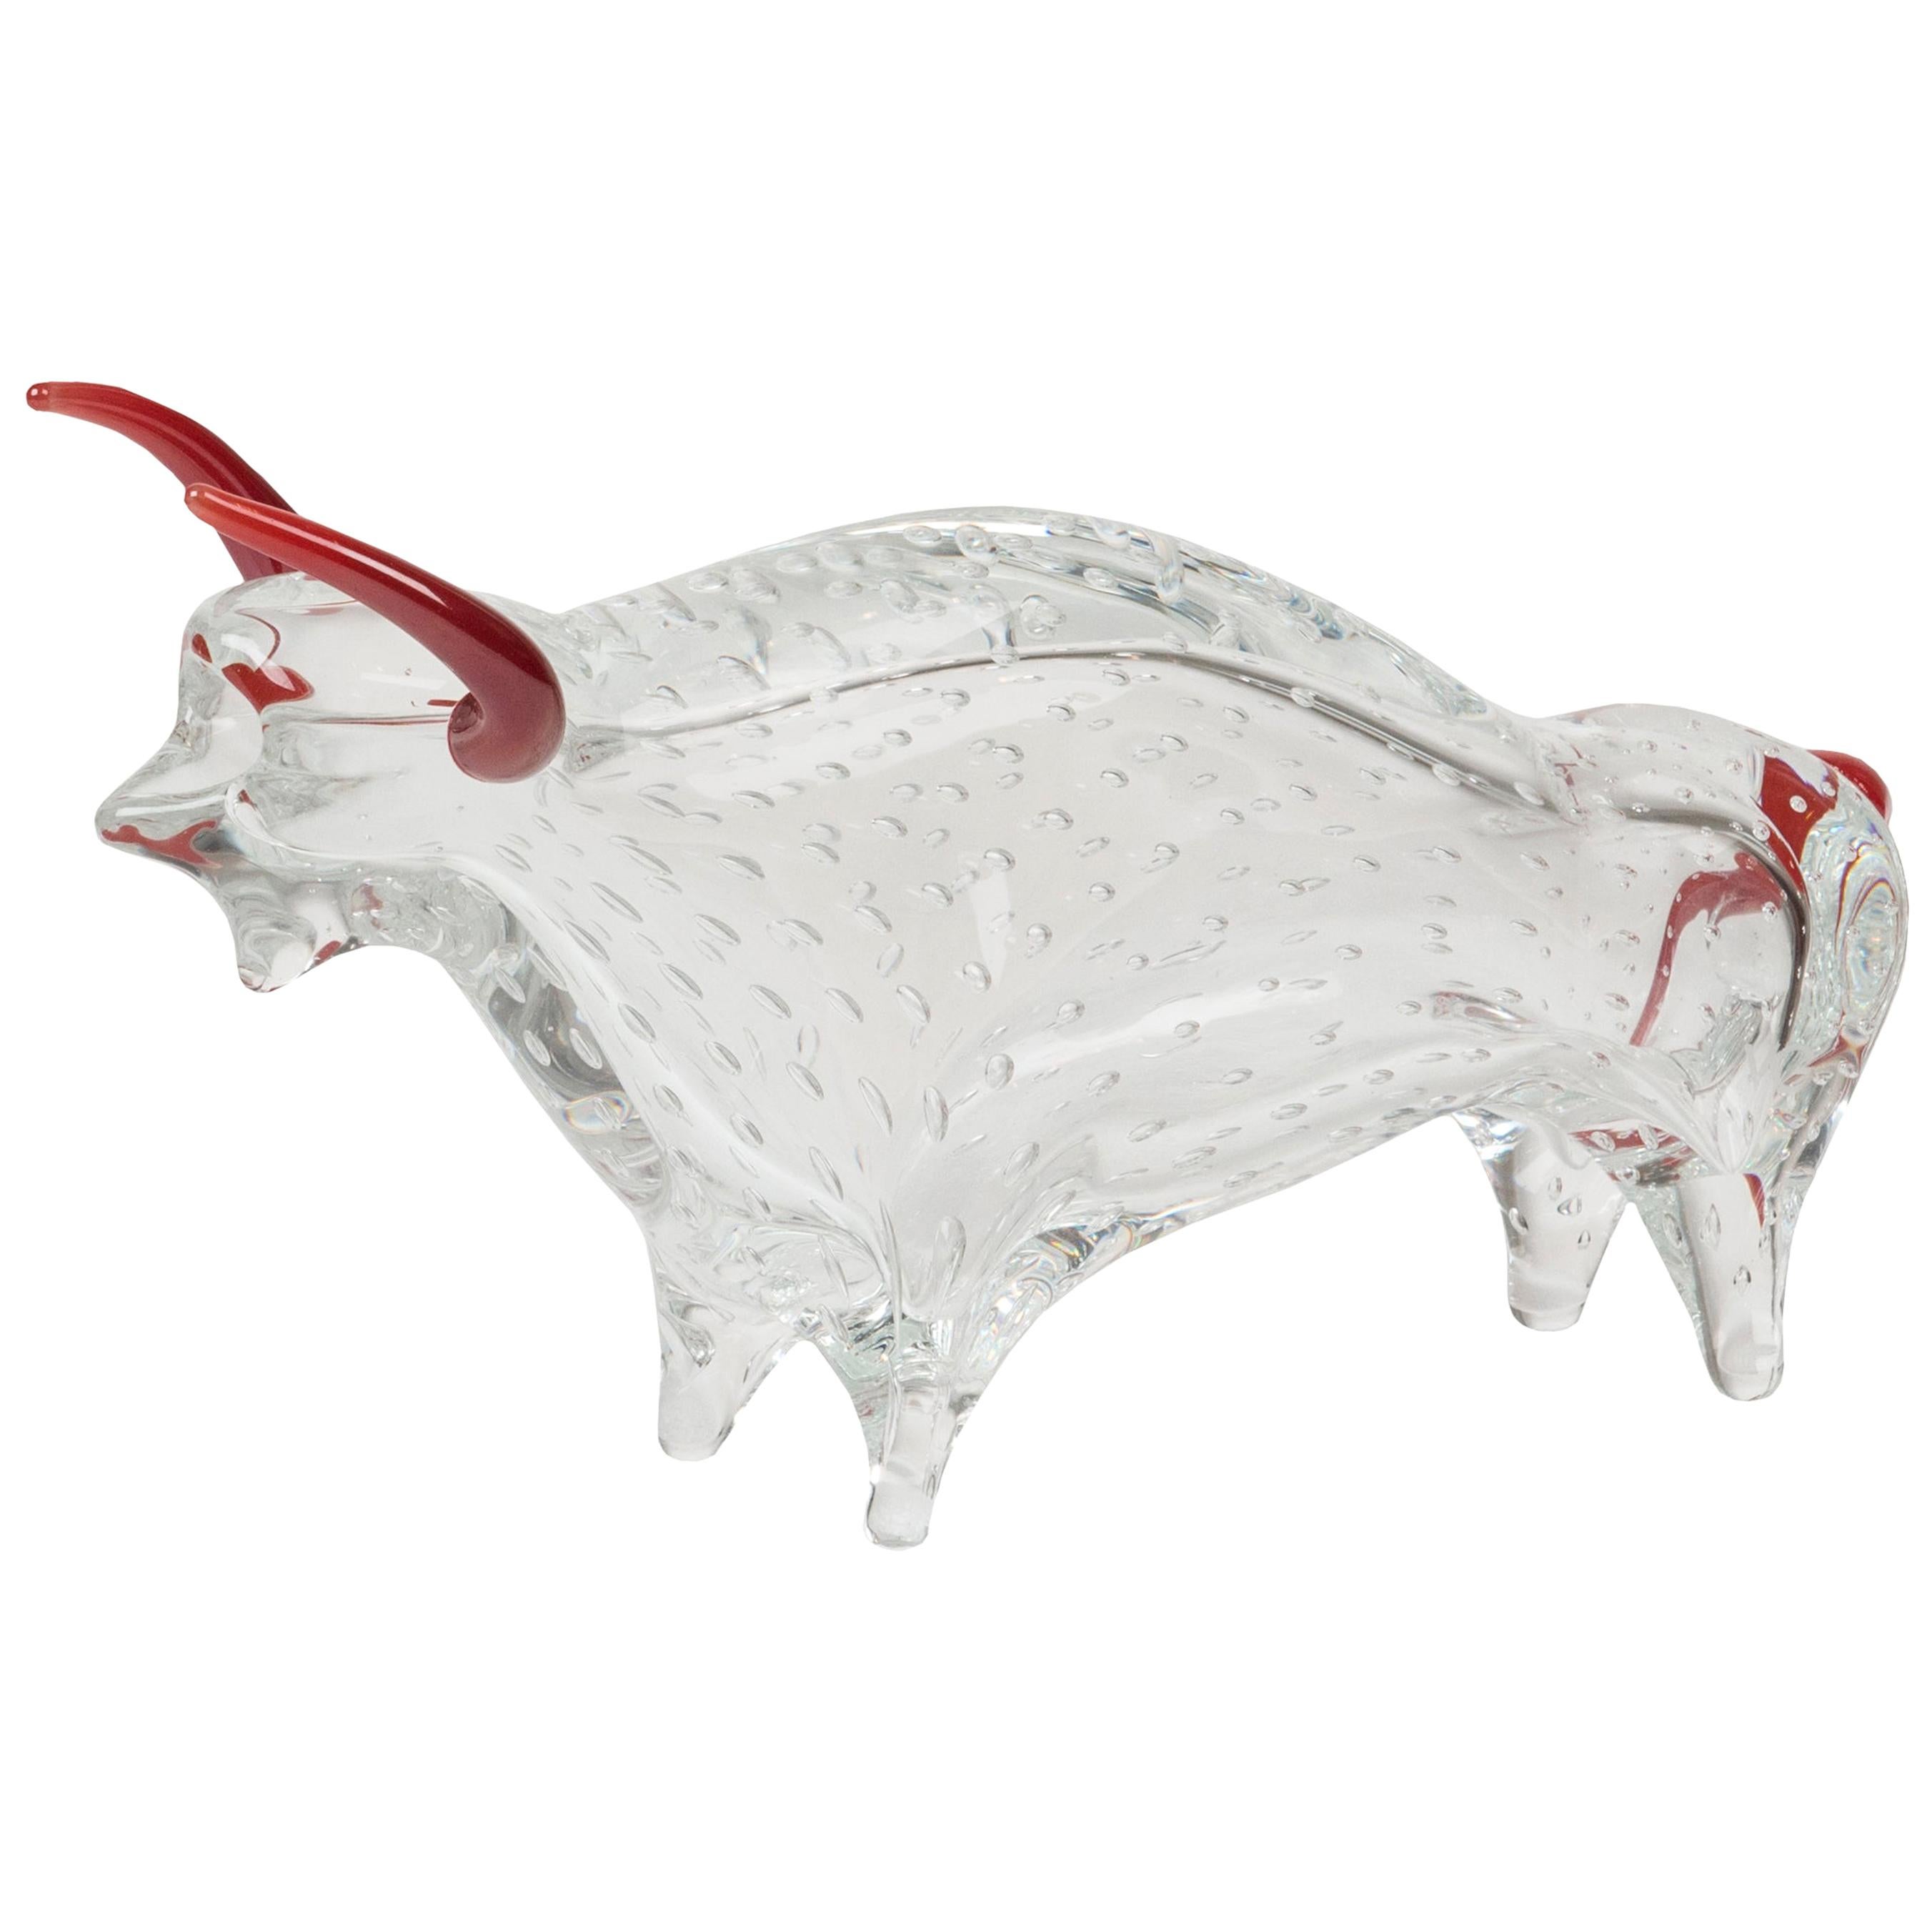 Small Bull with Red Horns, in Glass, Italy